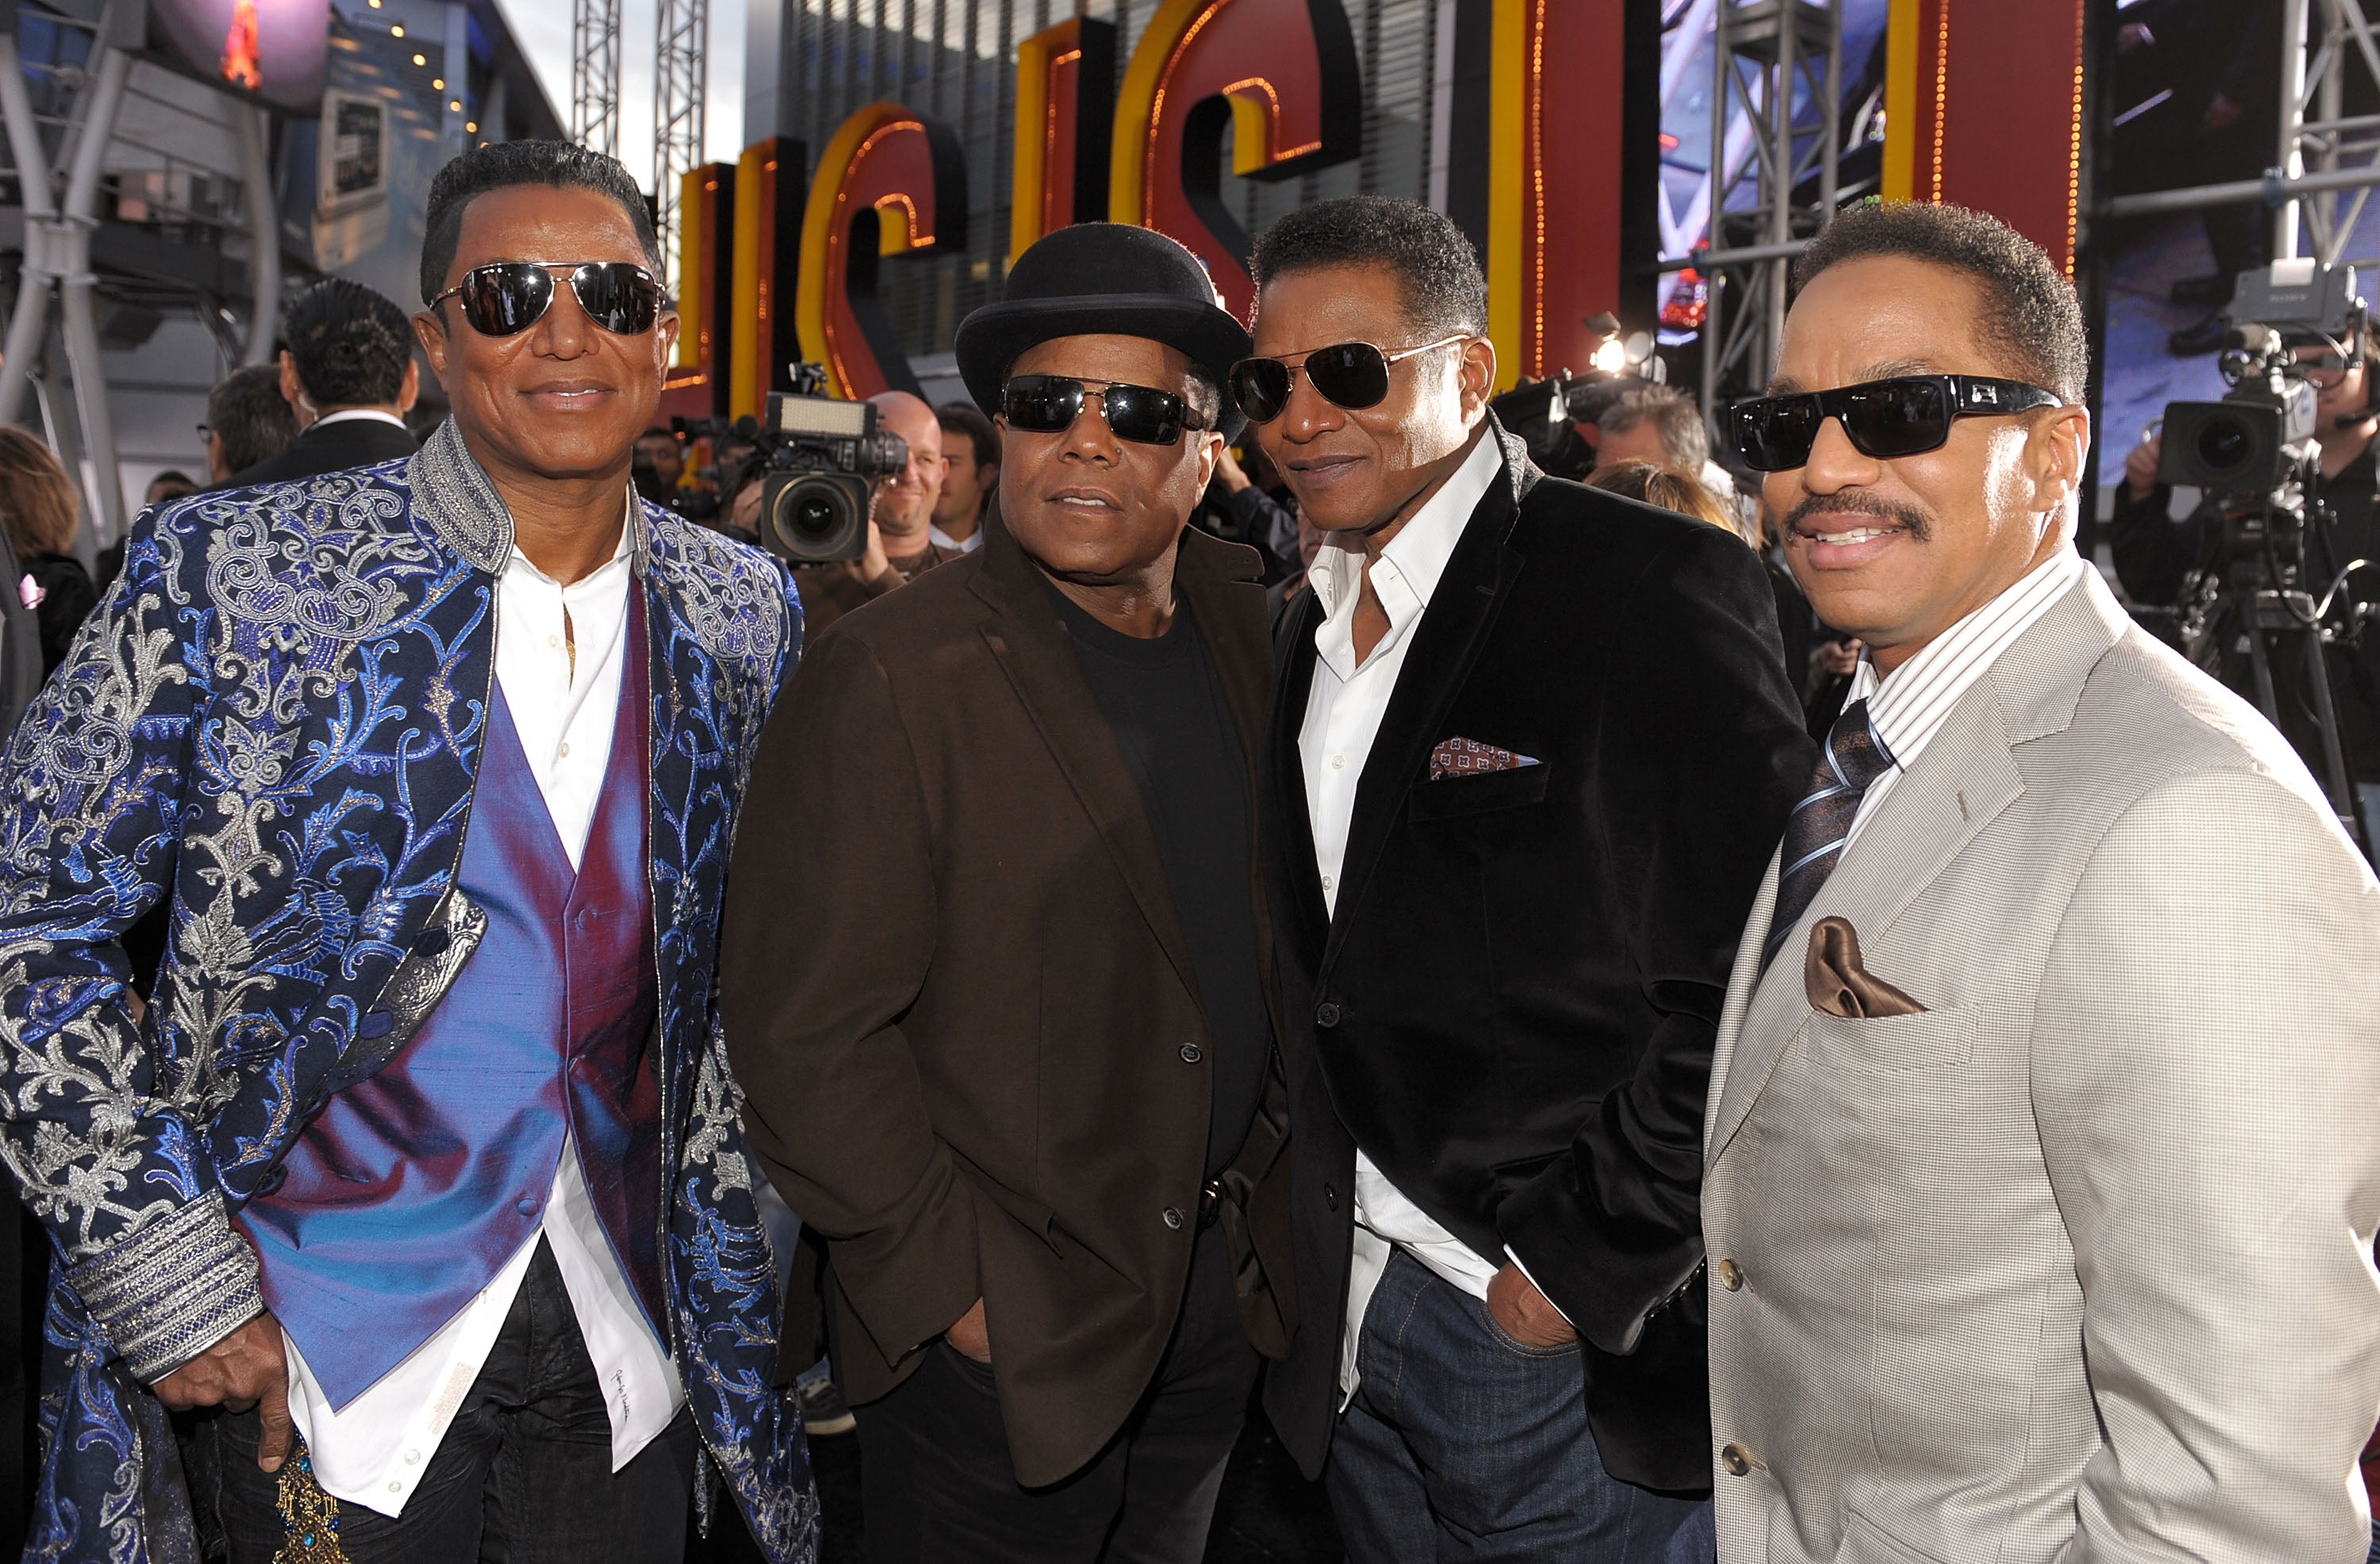 The Jacksons Announce First Tour in 28 Years